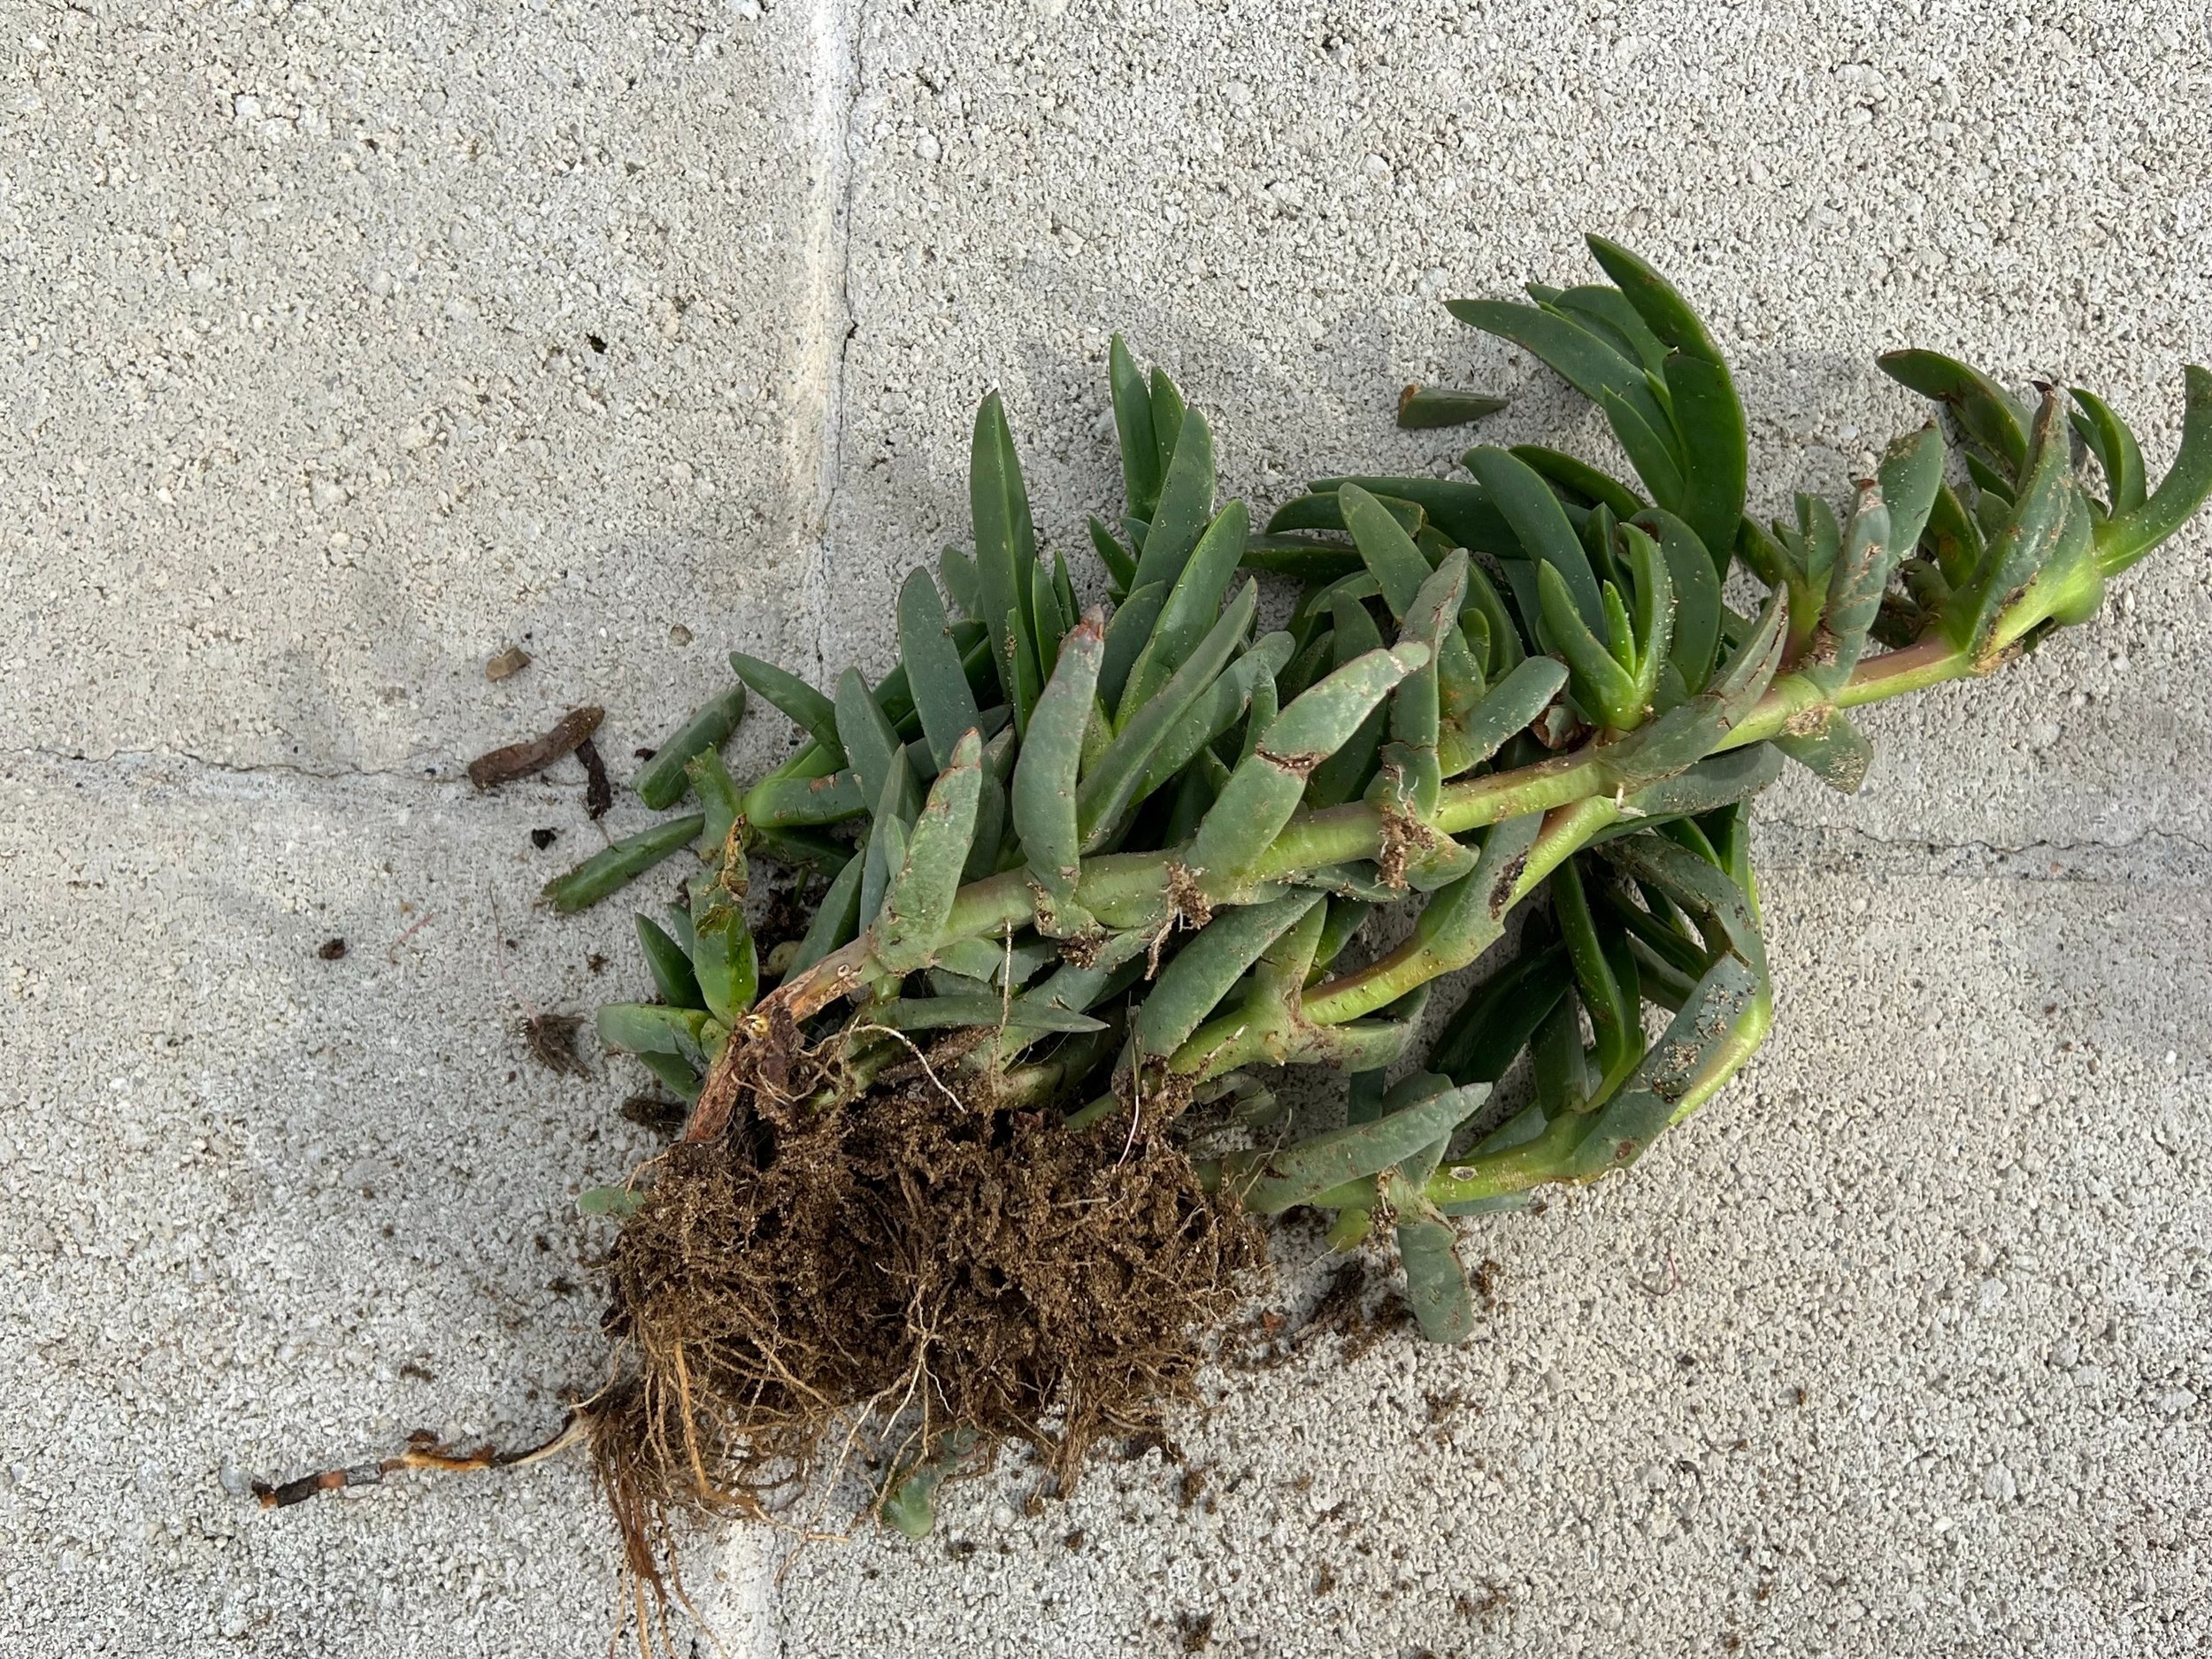 Ice plant root system